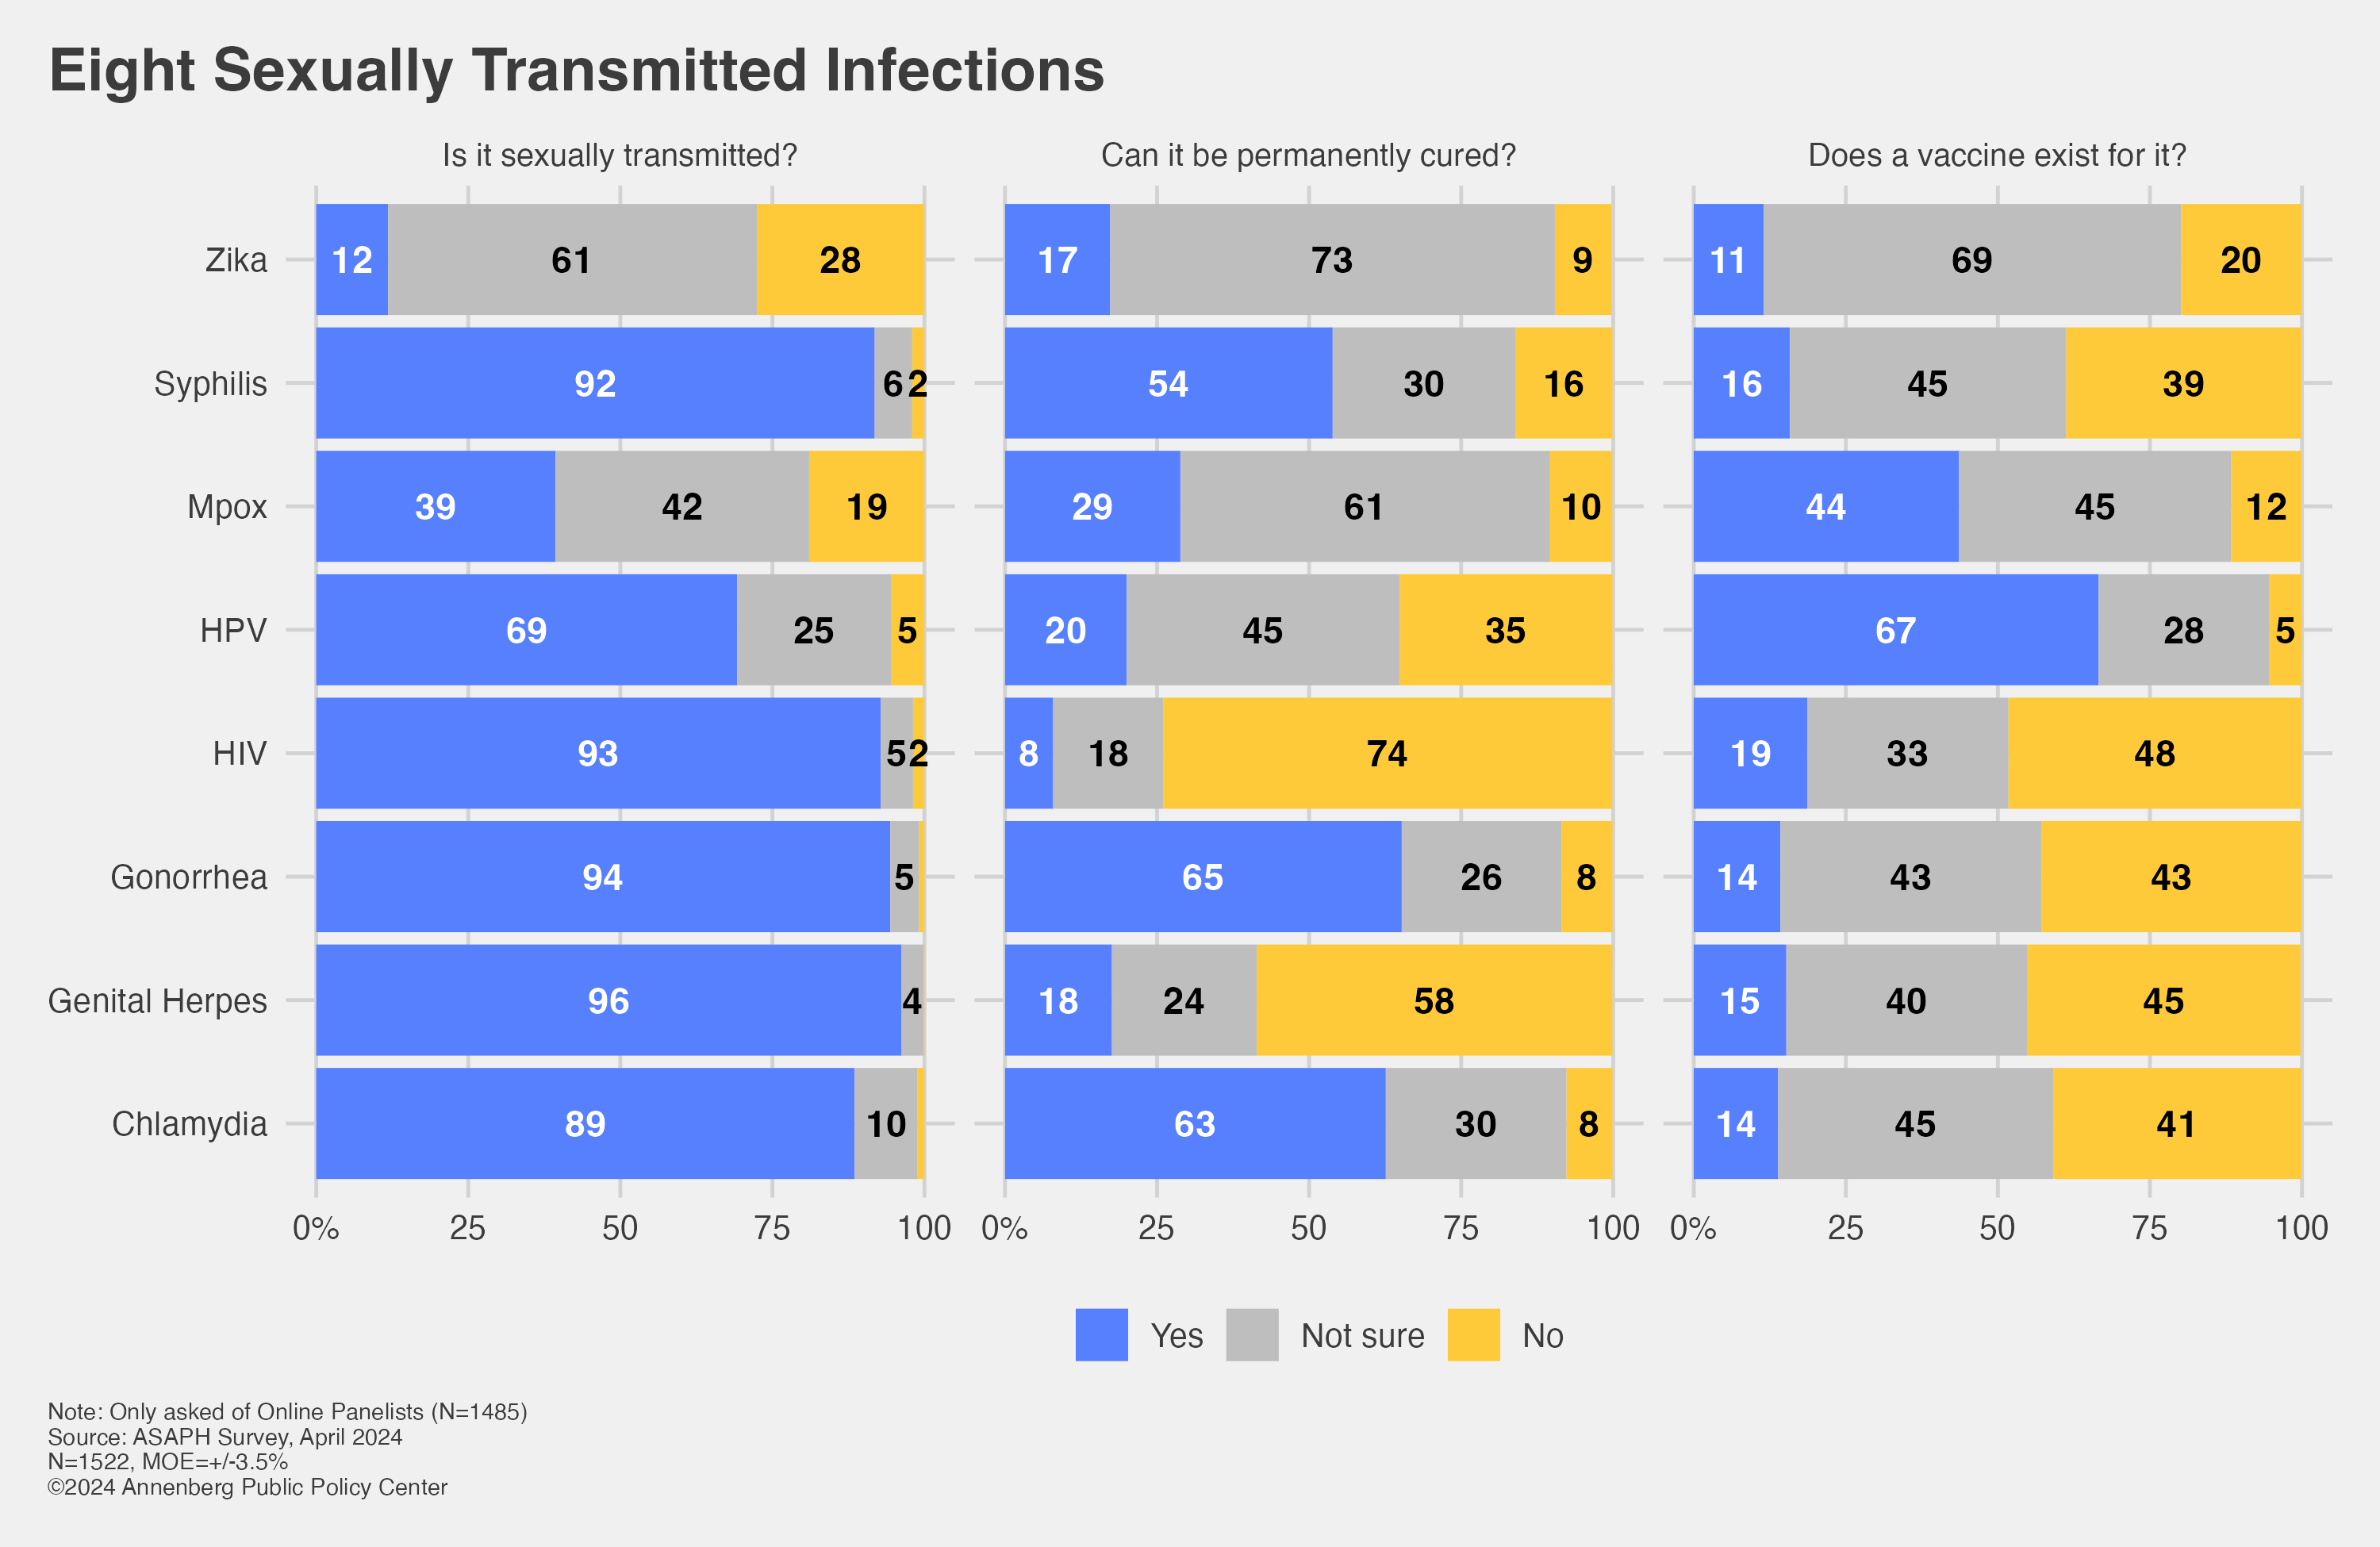 Bar chart showing the percentage of respondents who know whether eight infections are sexually transmitted and can be cured, and whether a vaccine exists to prevent them.